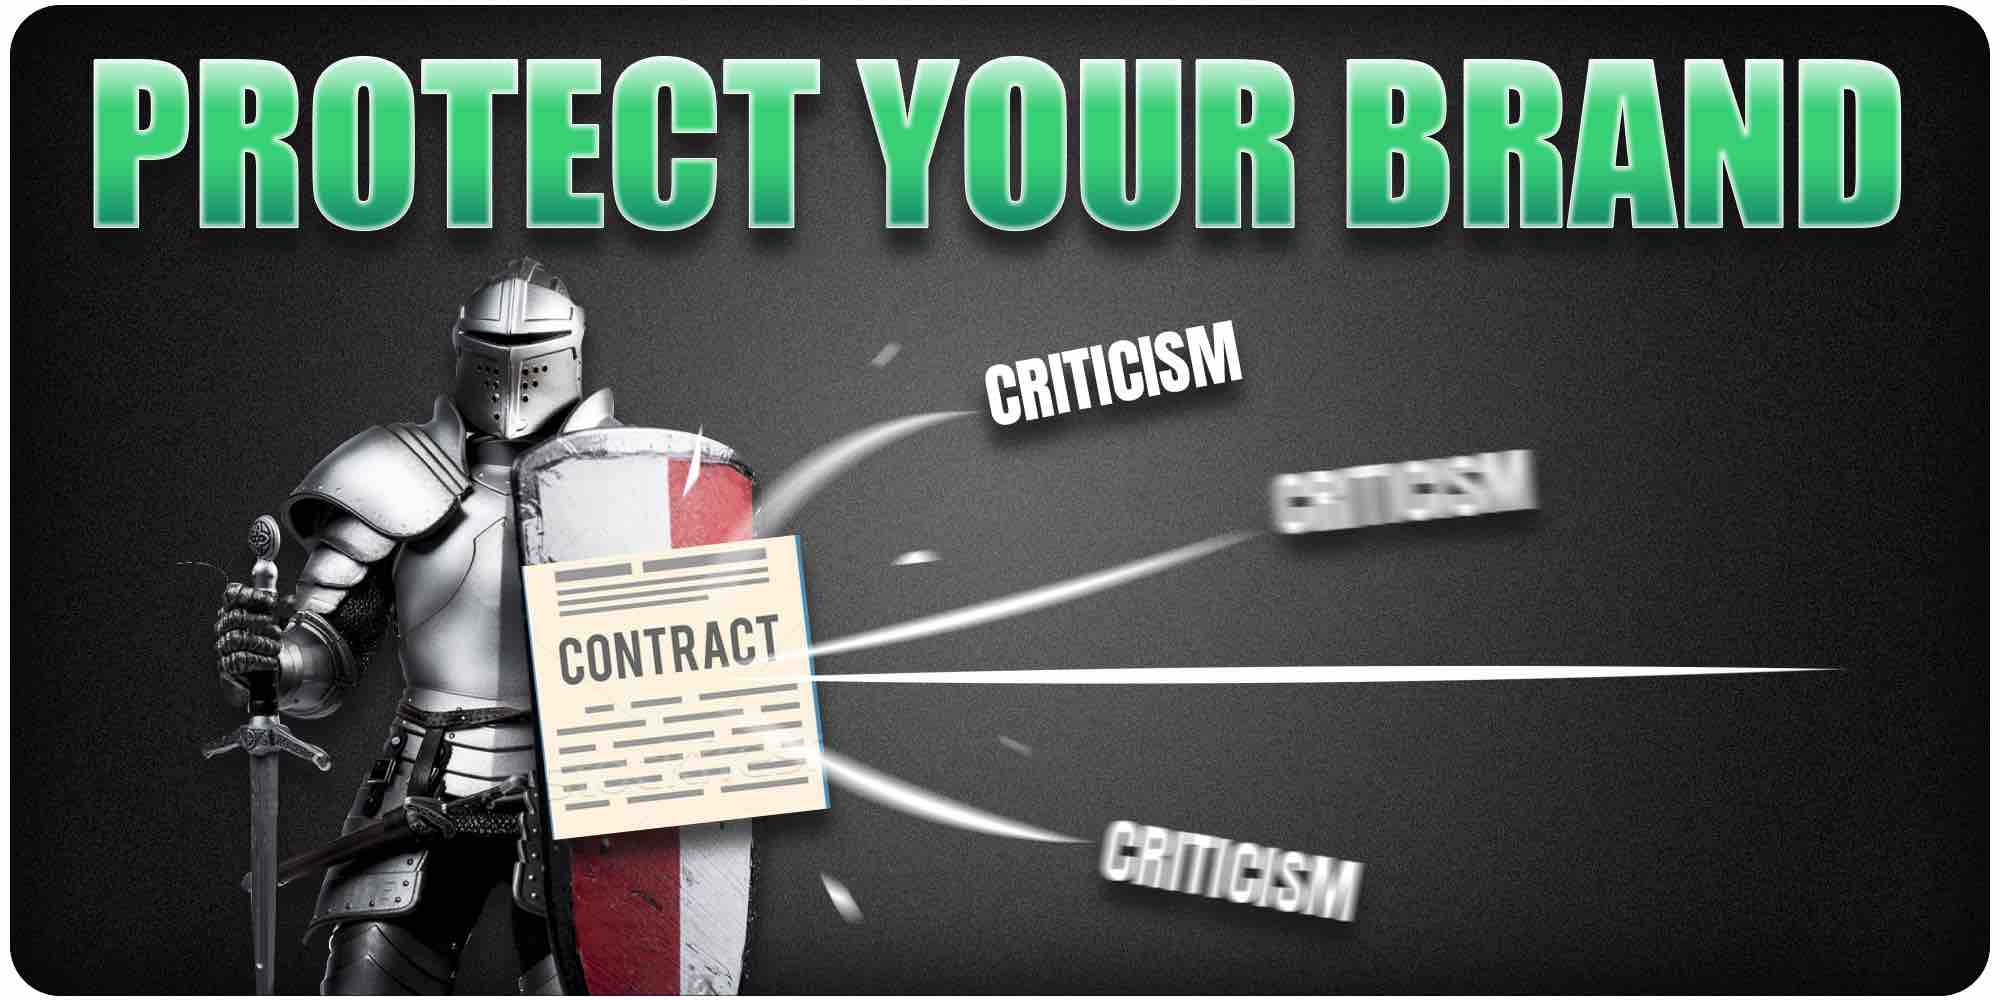 Contracts protect your brand as a ghostwriter